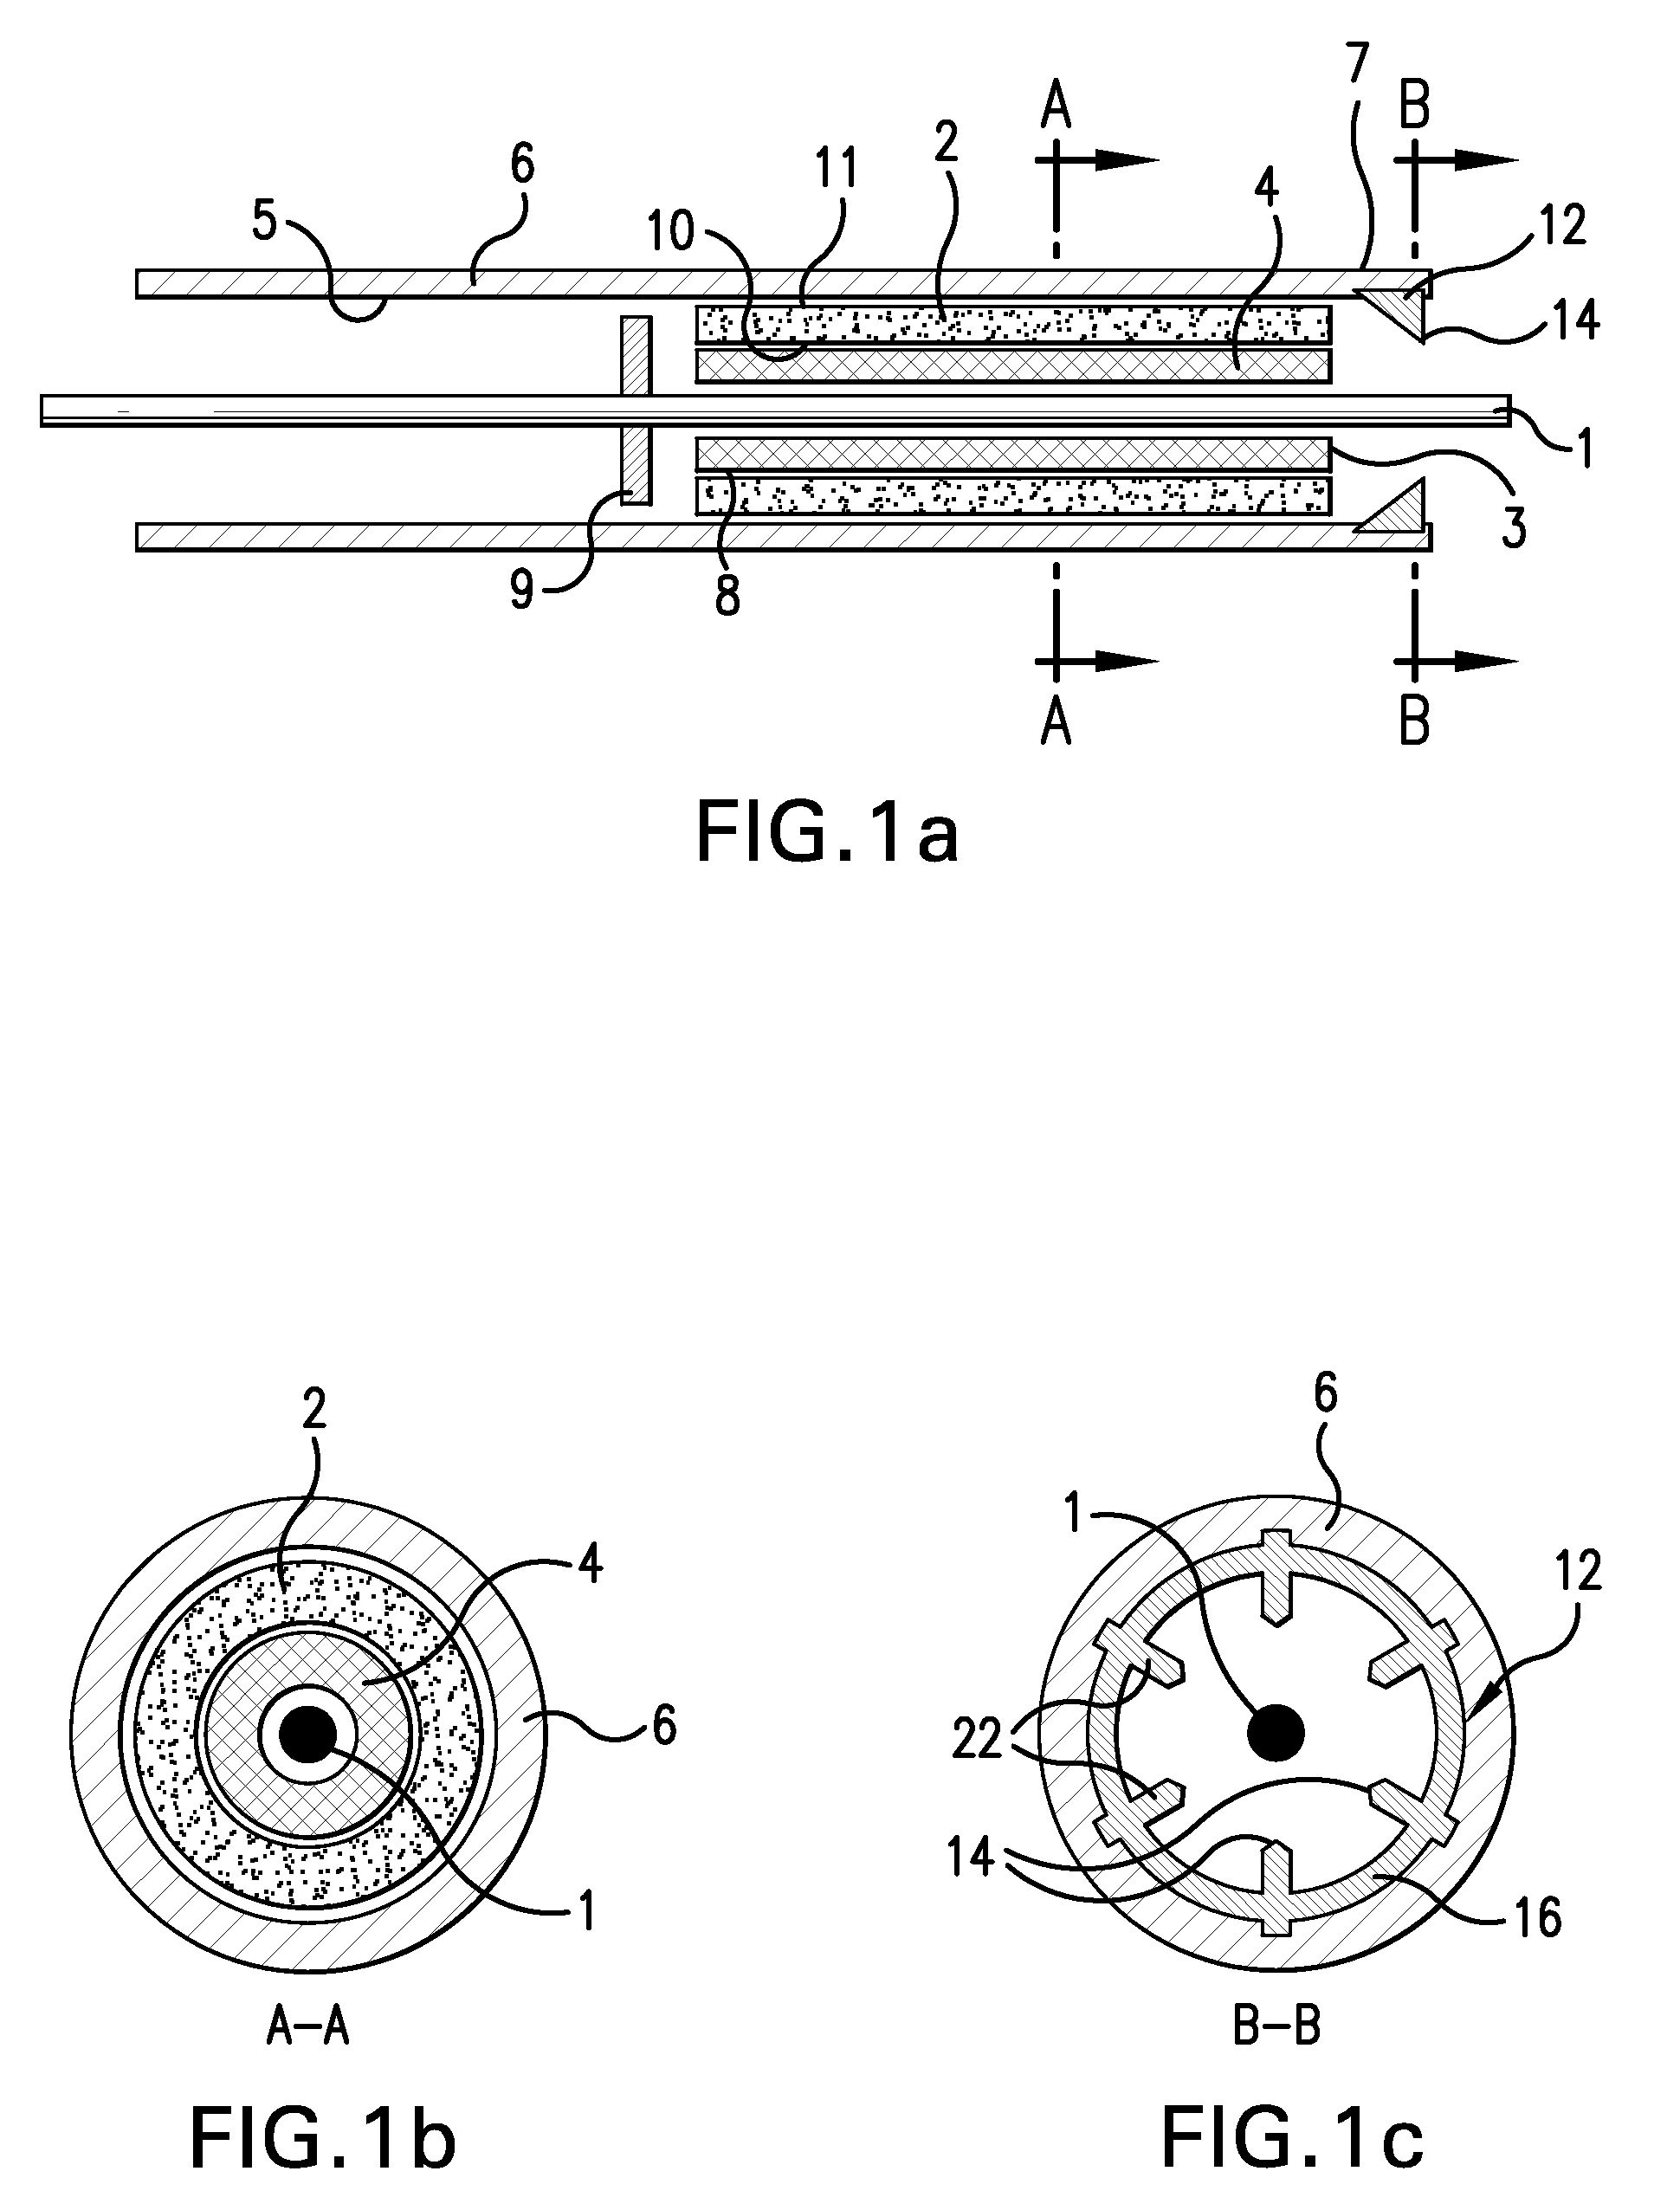 Self-expandable stent with a constrictive coating and method of use